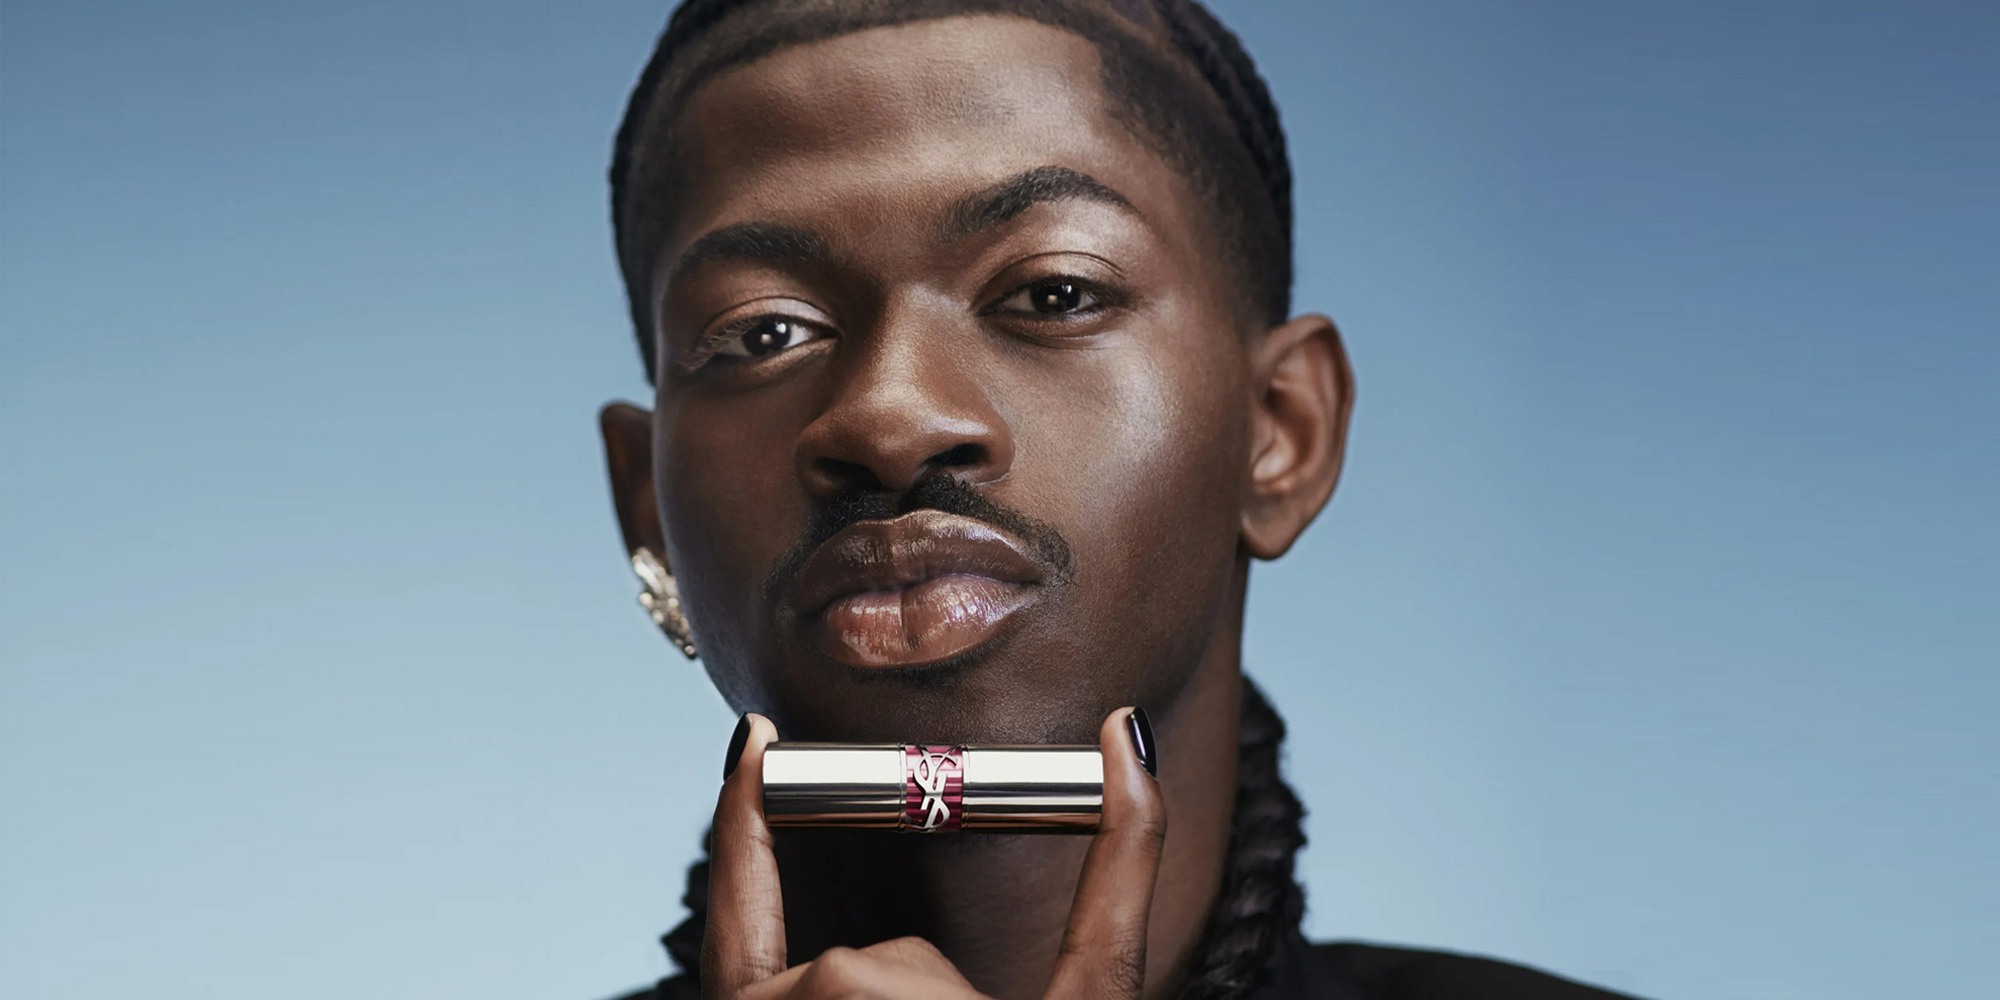 YVES SAINT LAURENT BEAUTY 2023 CAMPAIGN FILM STARRING LIL NAS X